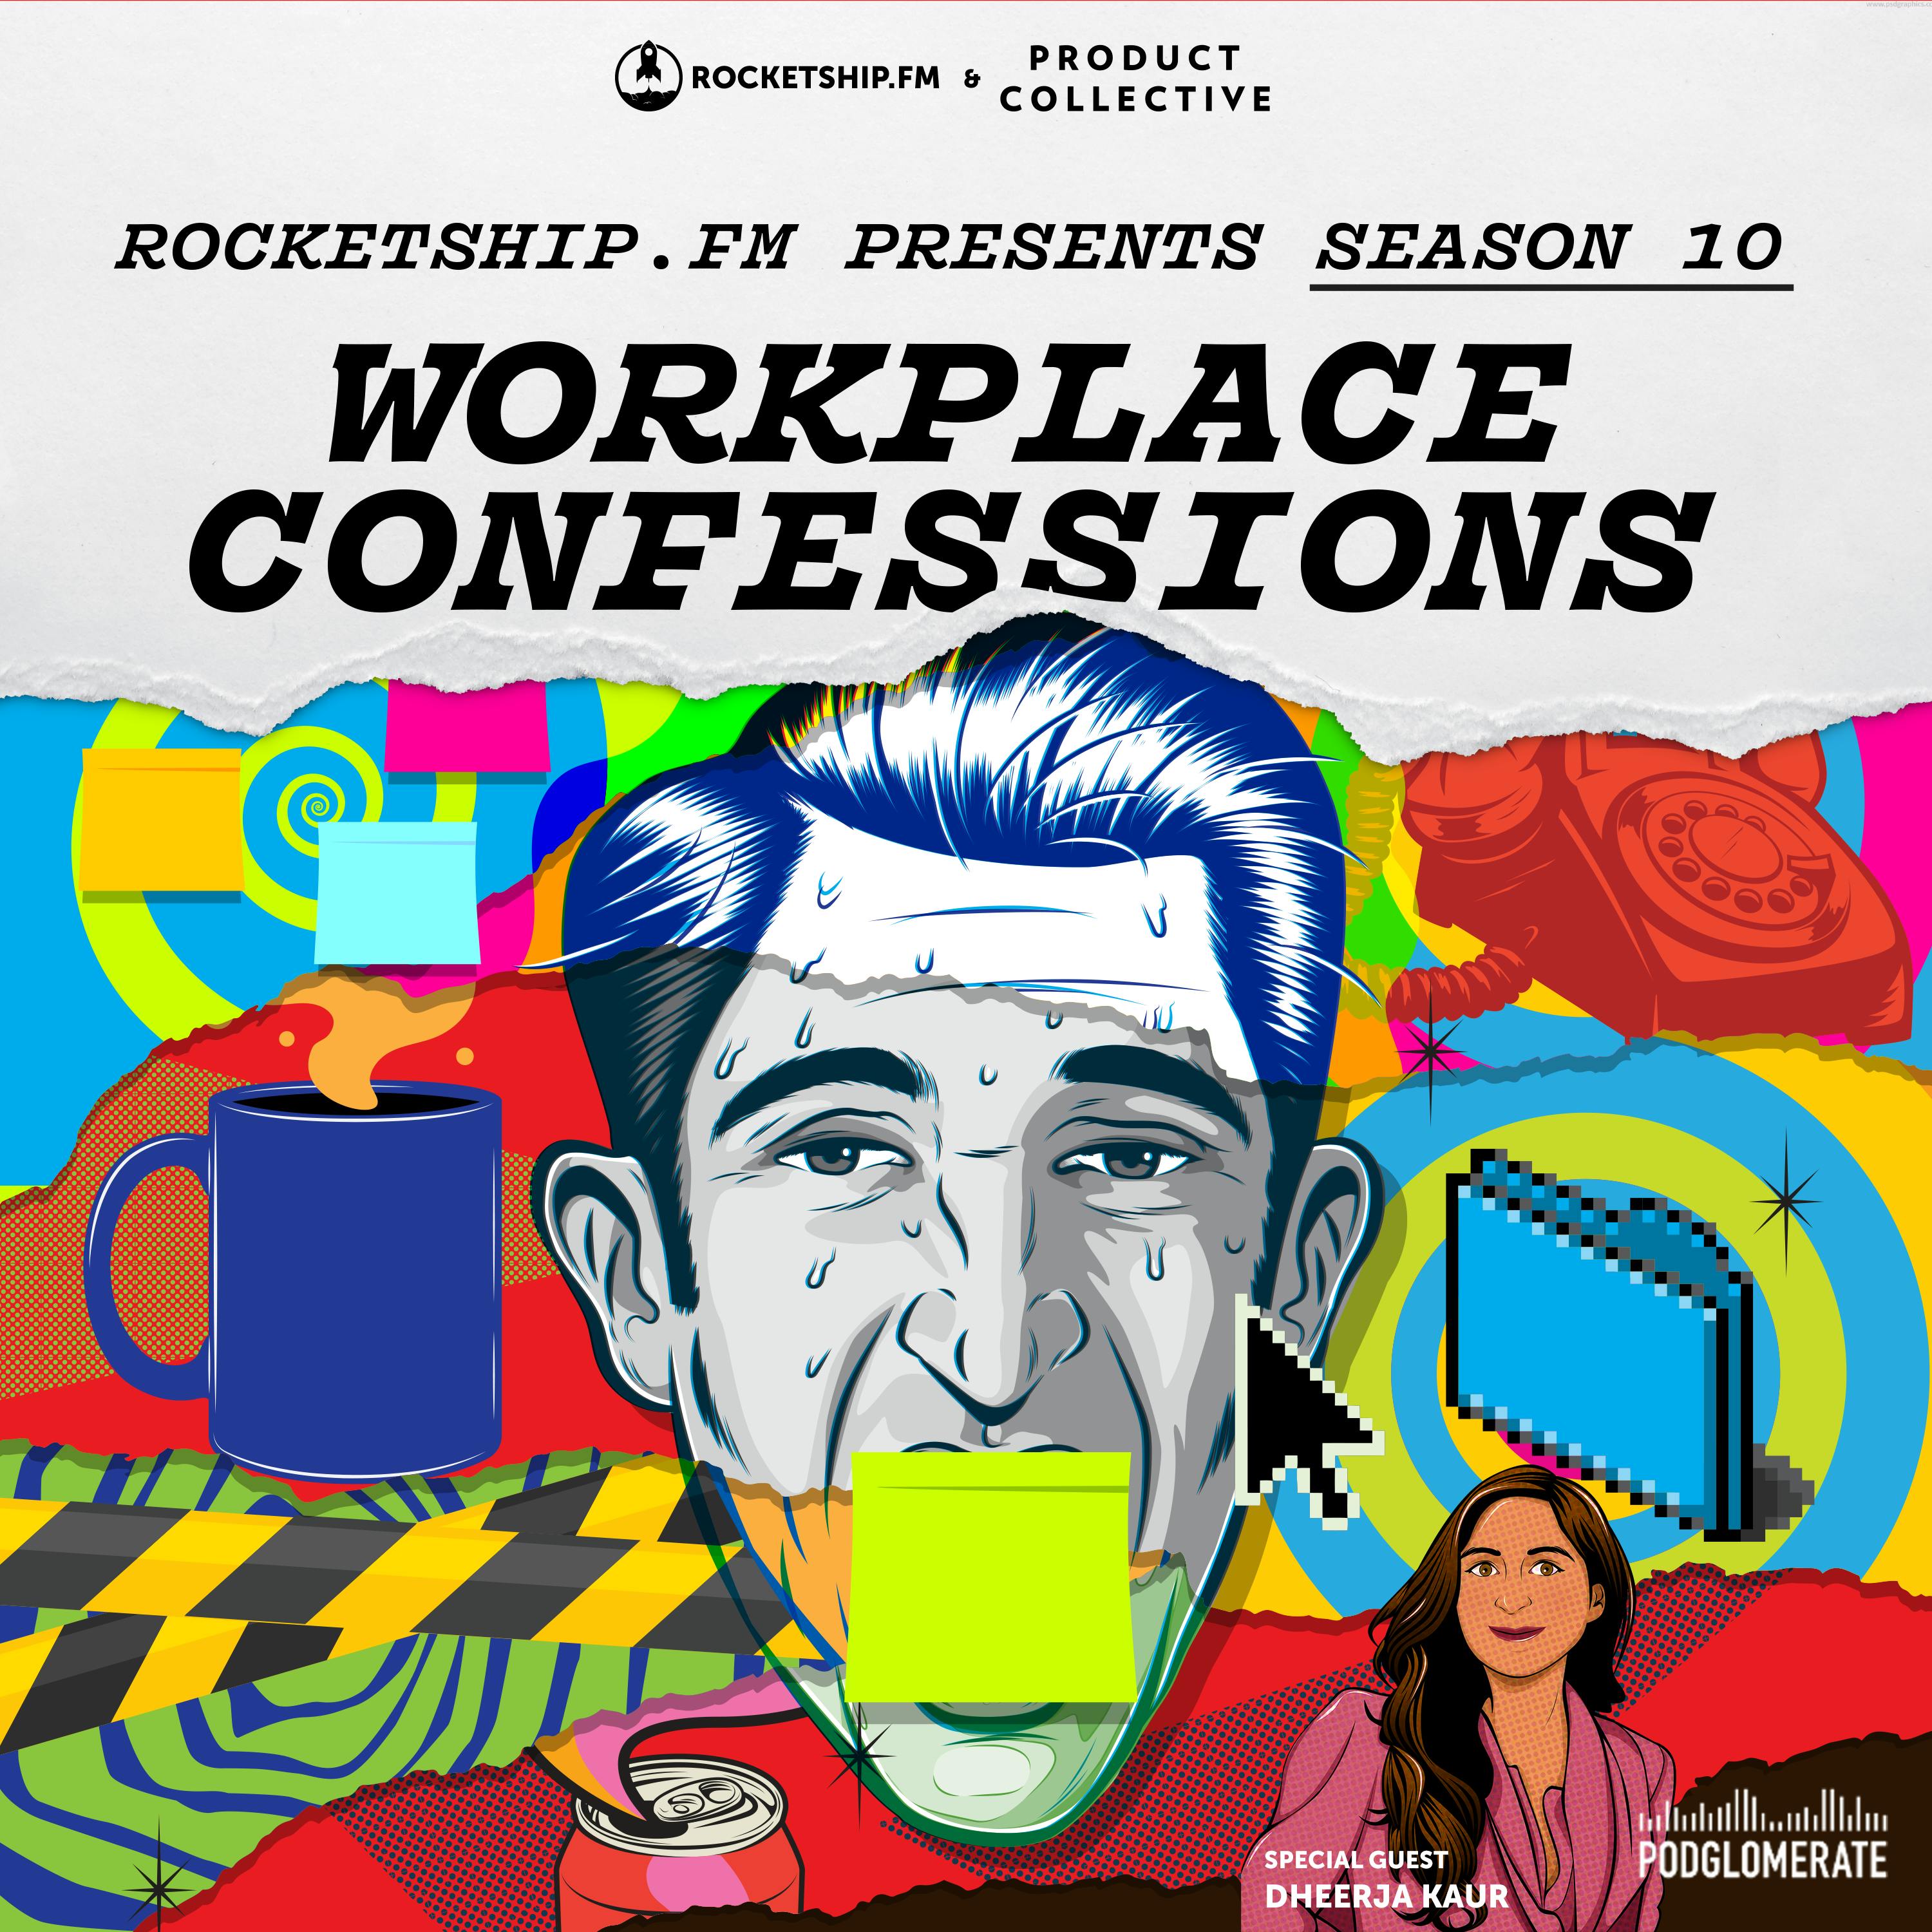 Workplace Confessions with Dheerja Kaur of Robinhood: "Workplace High" & "Underpaid"